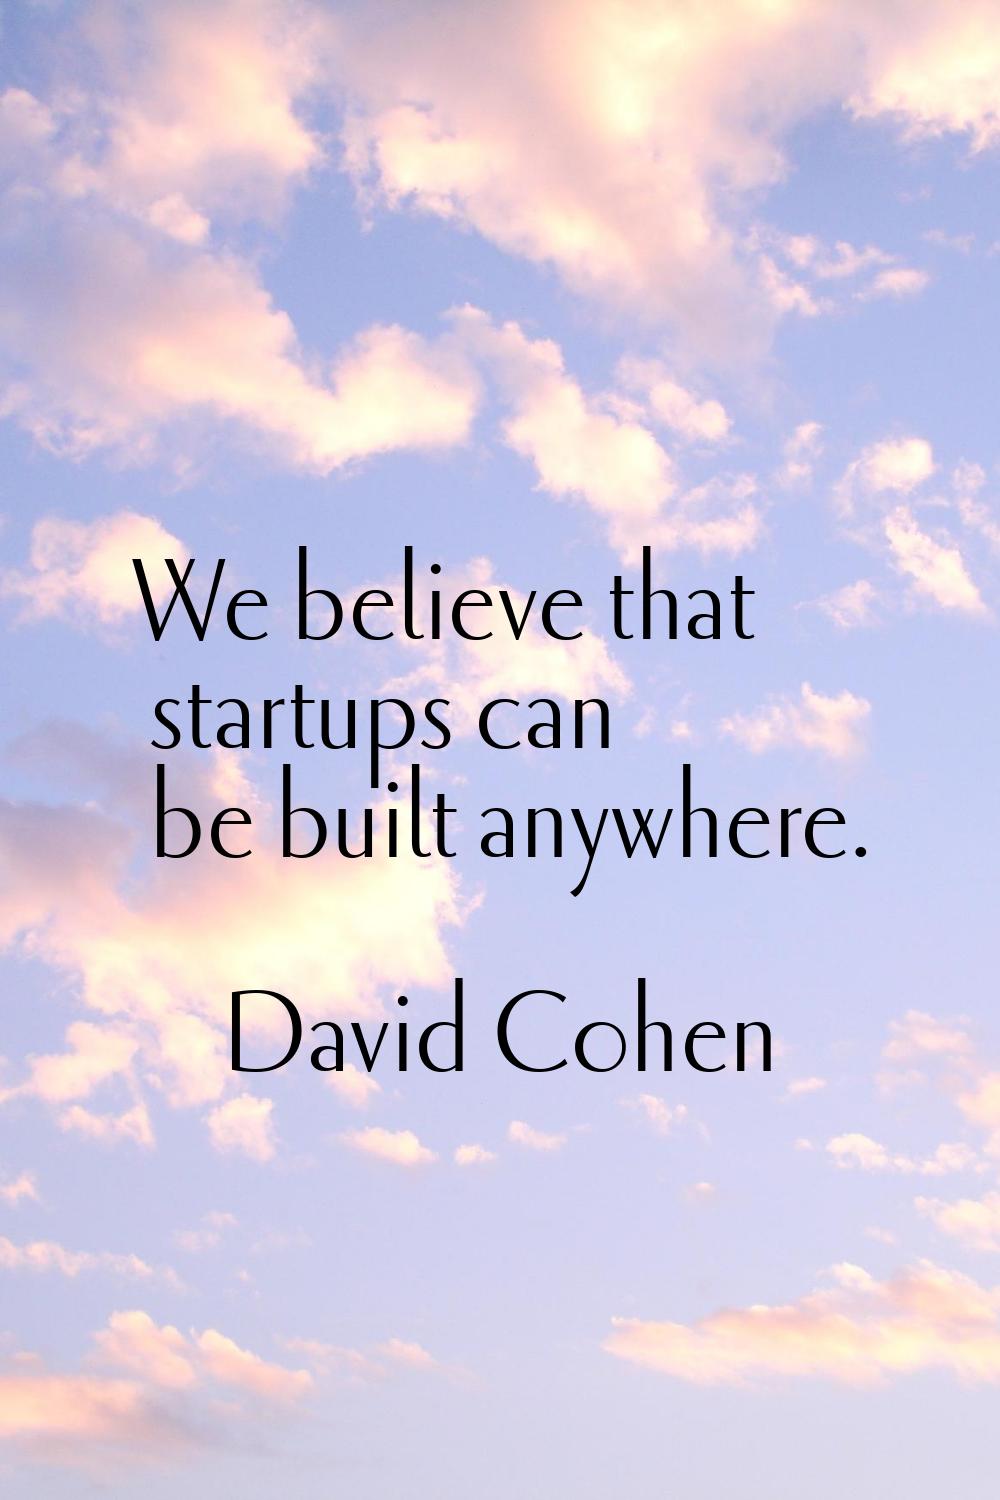 We believe that startups can be built anywhere.